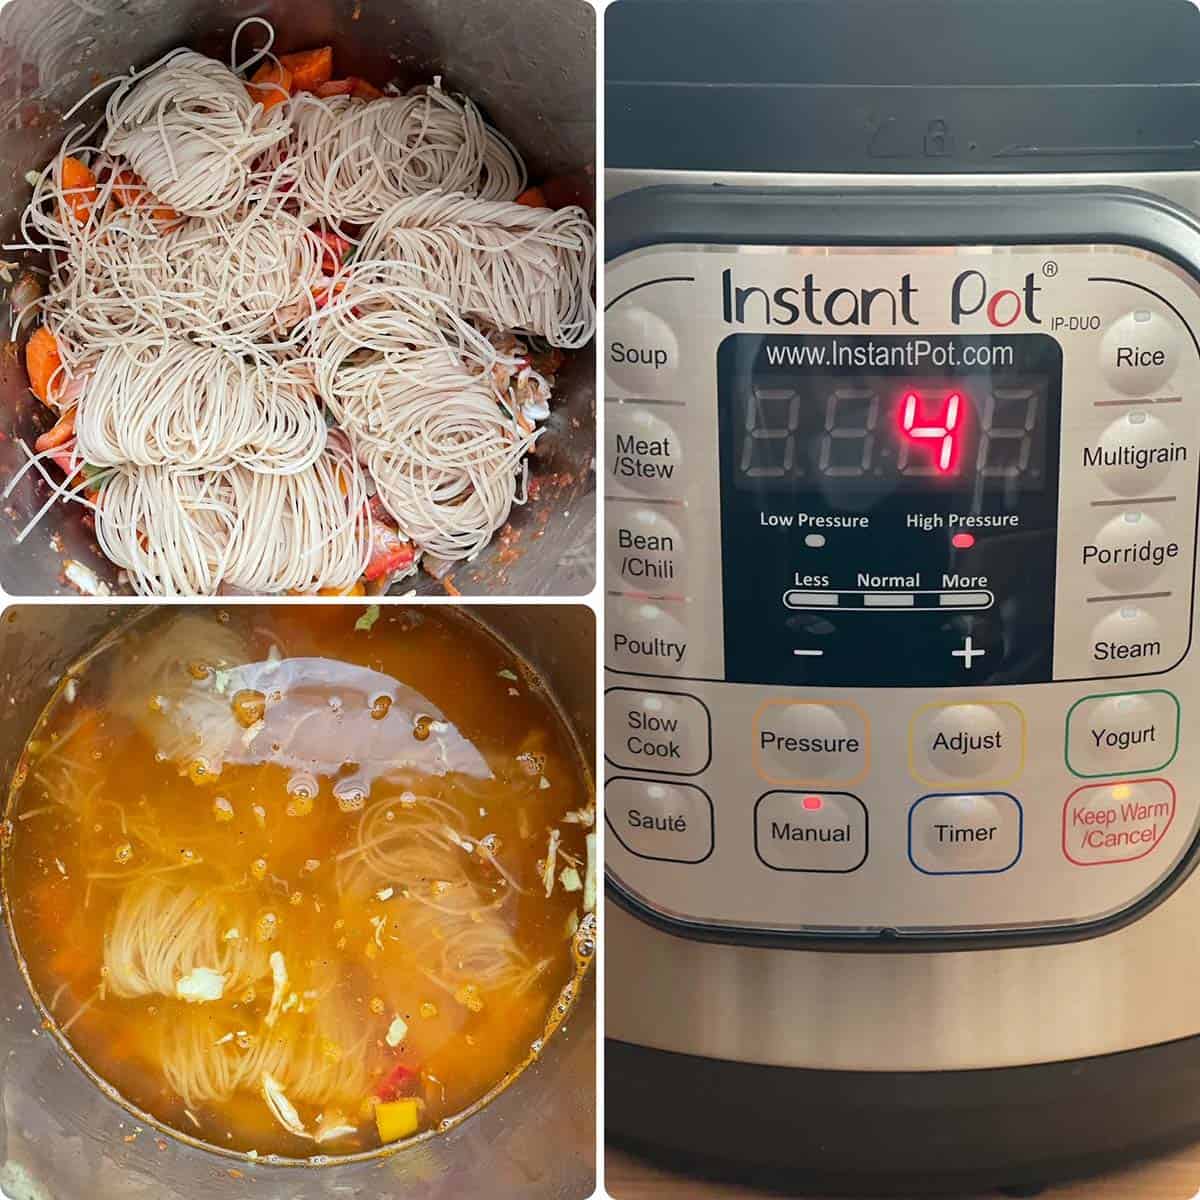 Adding noodles and water and cooking in Instant Pot